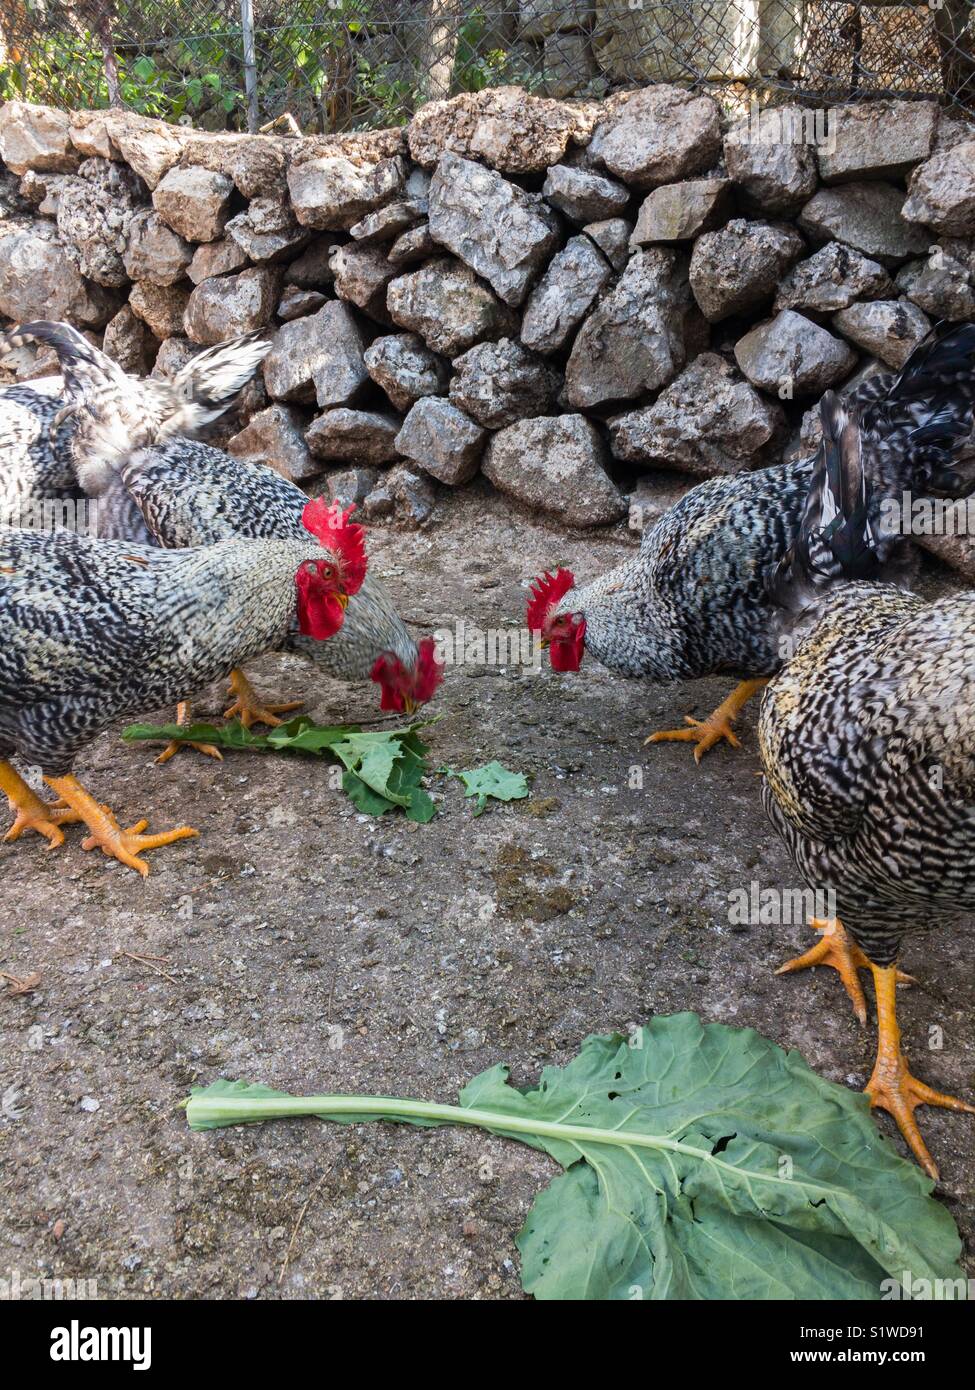 Roosters on farm outdoor Stock Photo